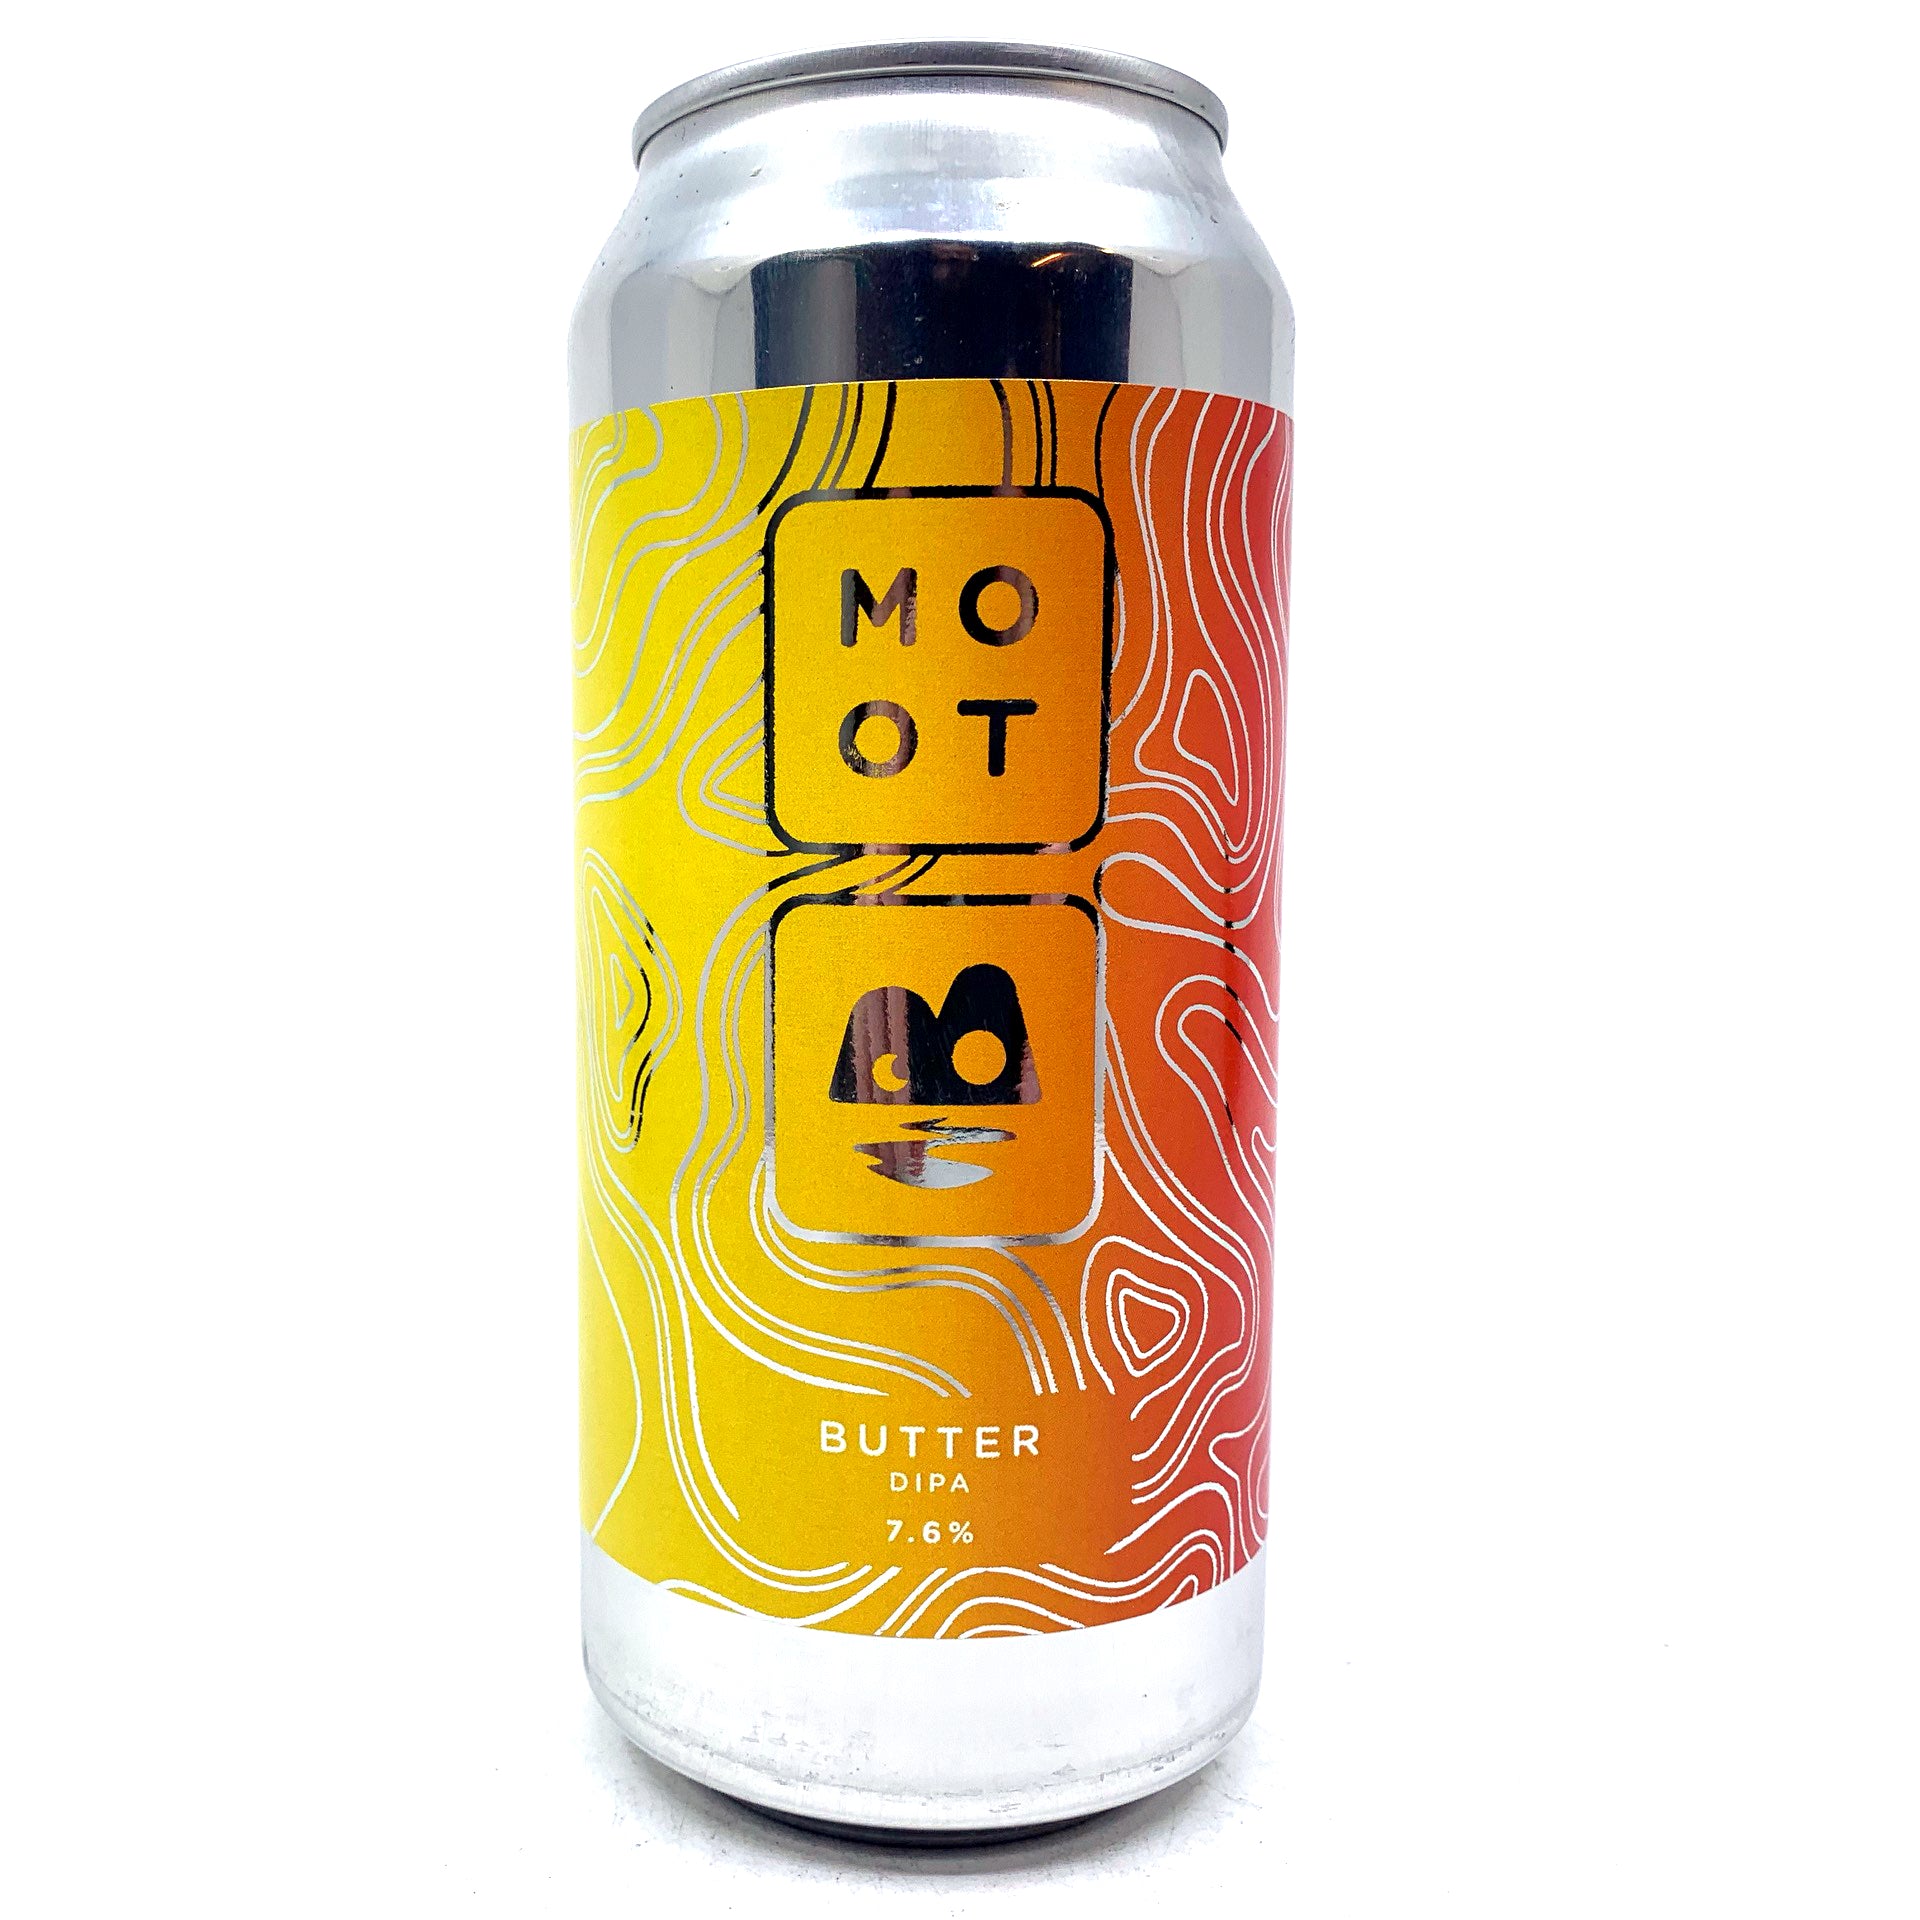 Moot Brew Co Butter Double IPA 7.6% (440ml can)-Hop Burns & Black